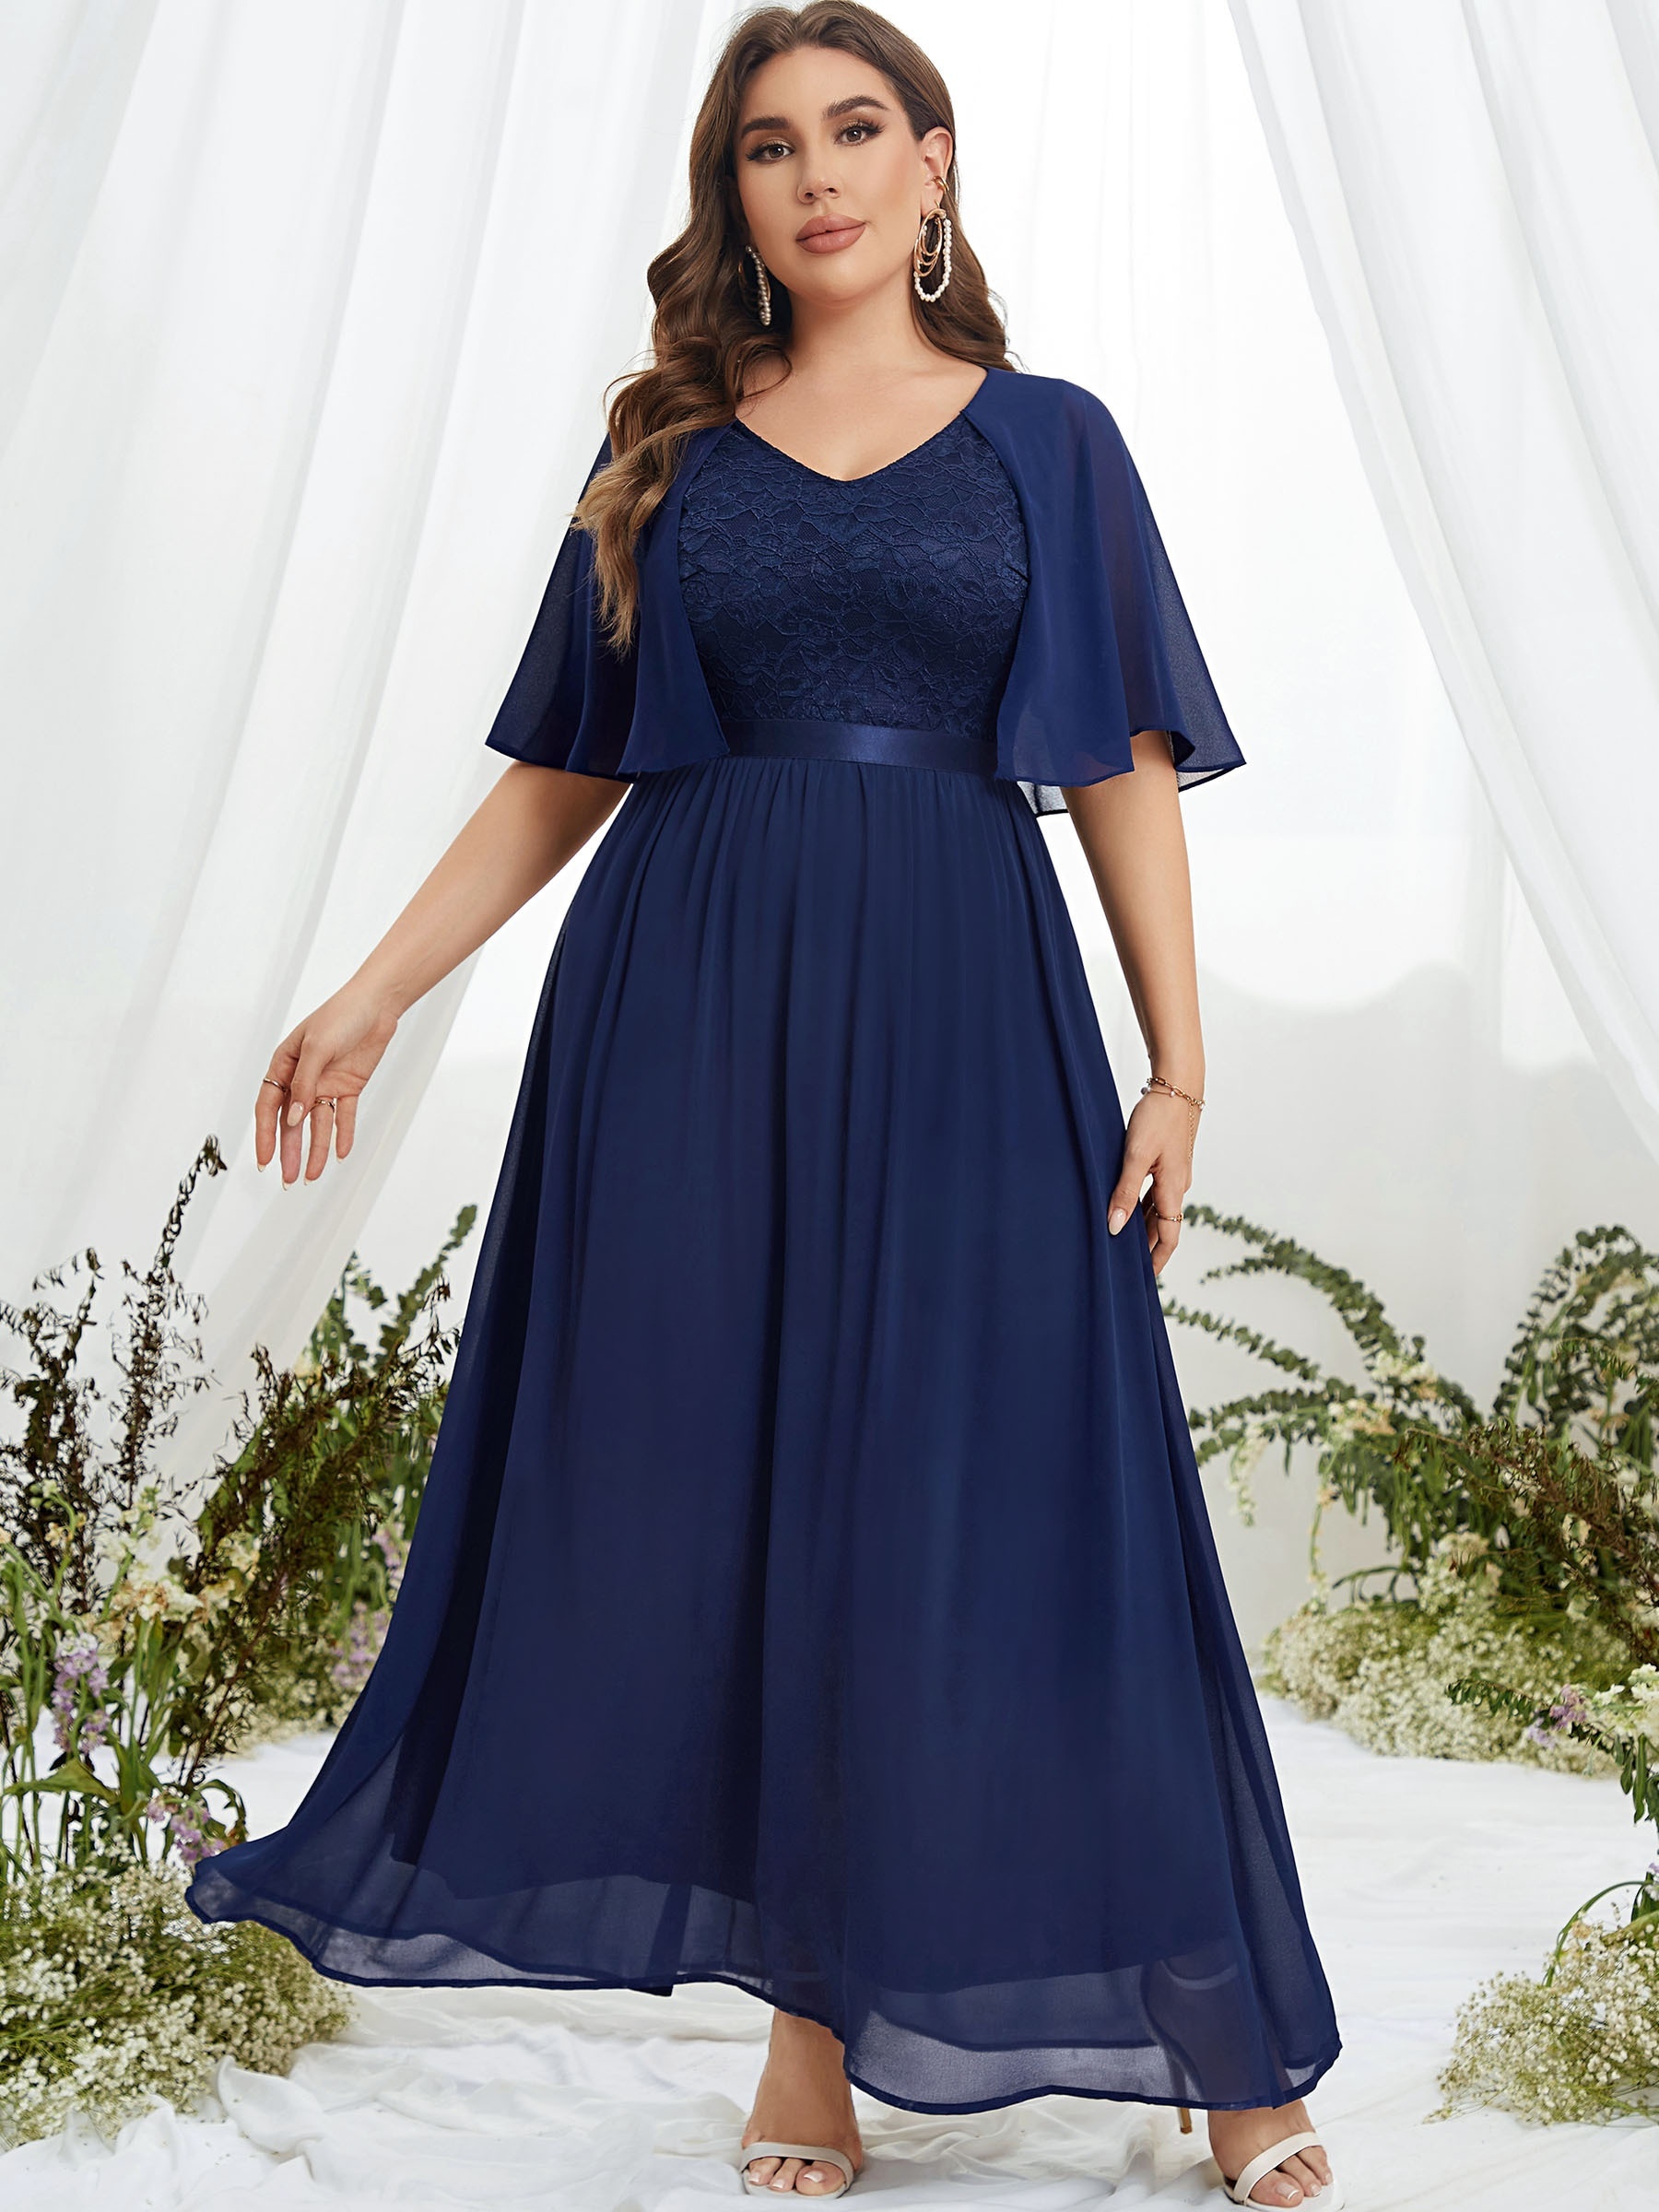 Flowy Butterfly Cape Sleeves Chiffon V-neck Ruffled Hem Bodysuit Spring  Summer Jumpsuit Party Banquet Wedding Formal Event Navy Blue 